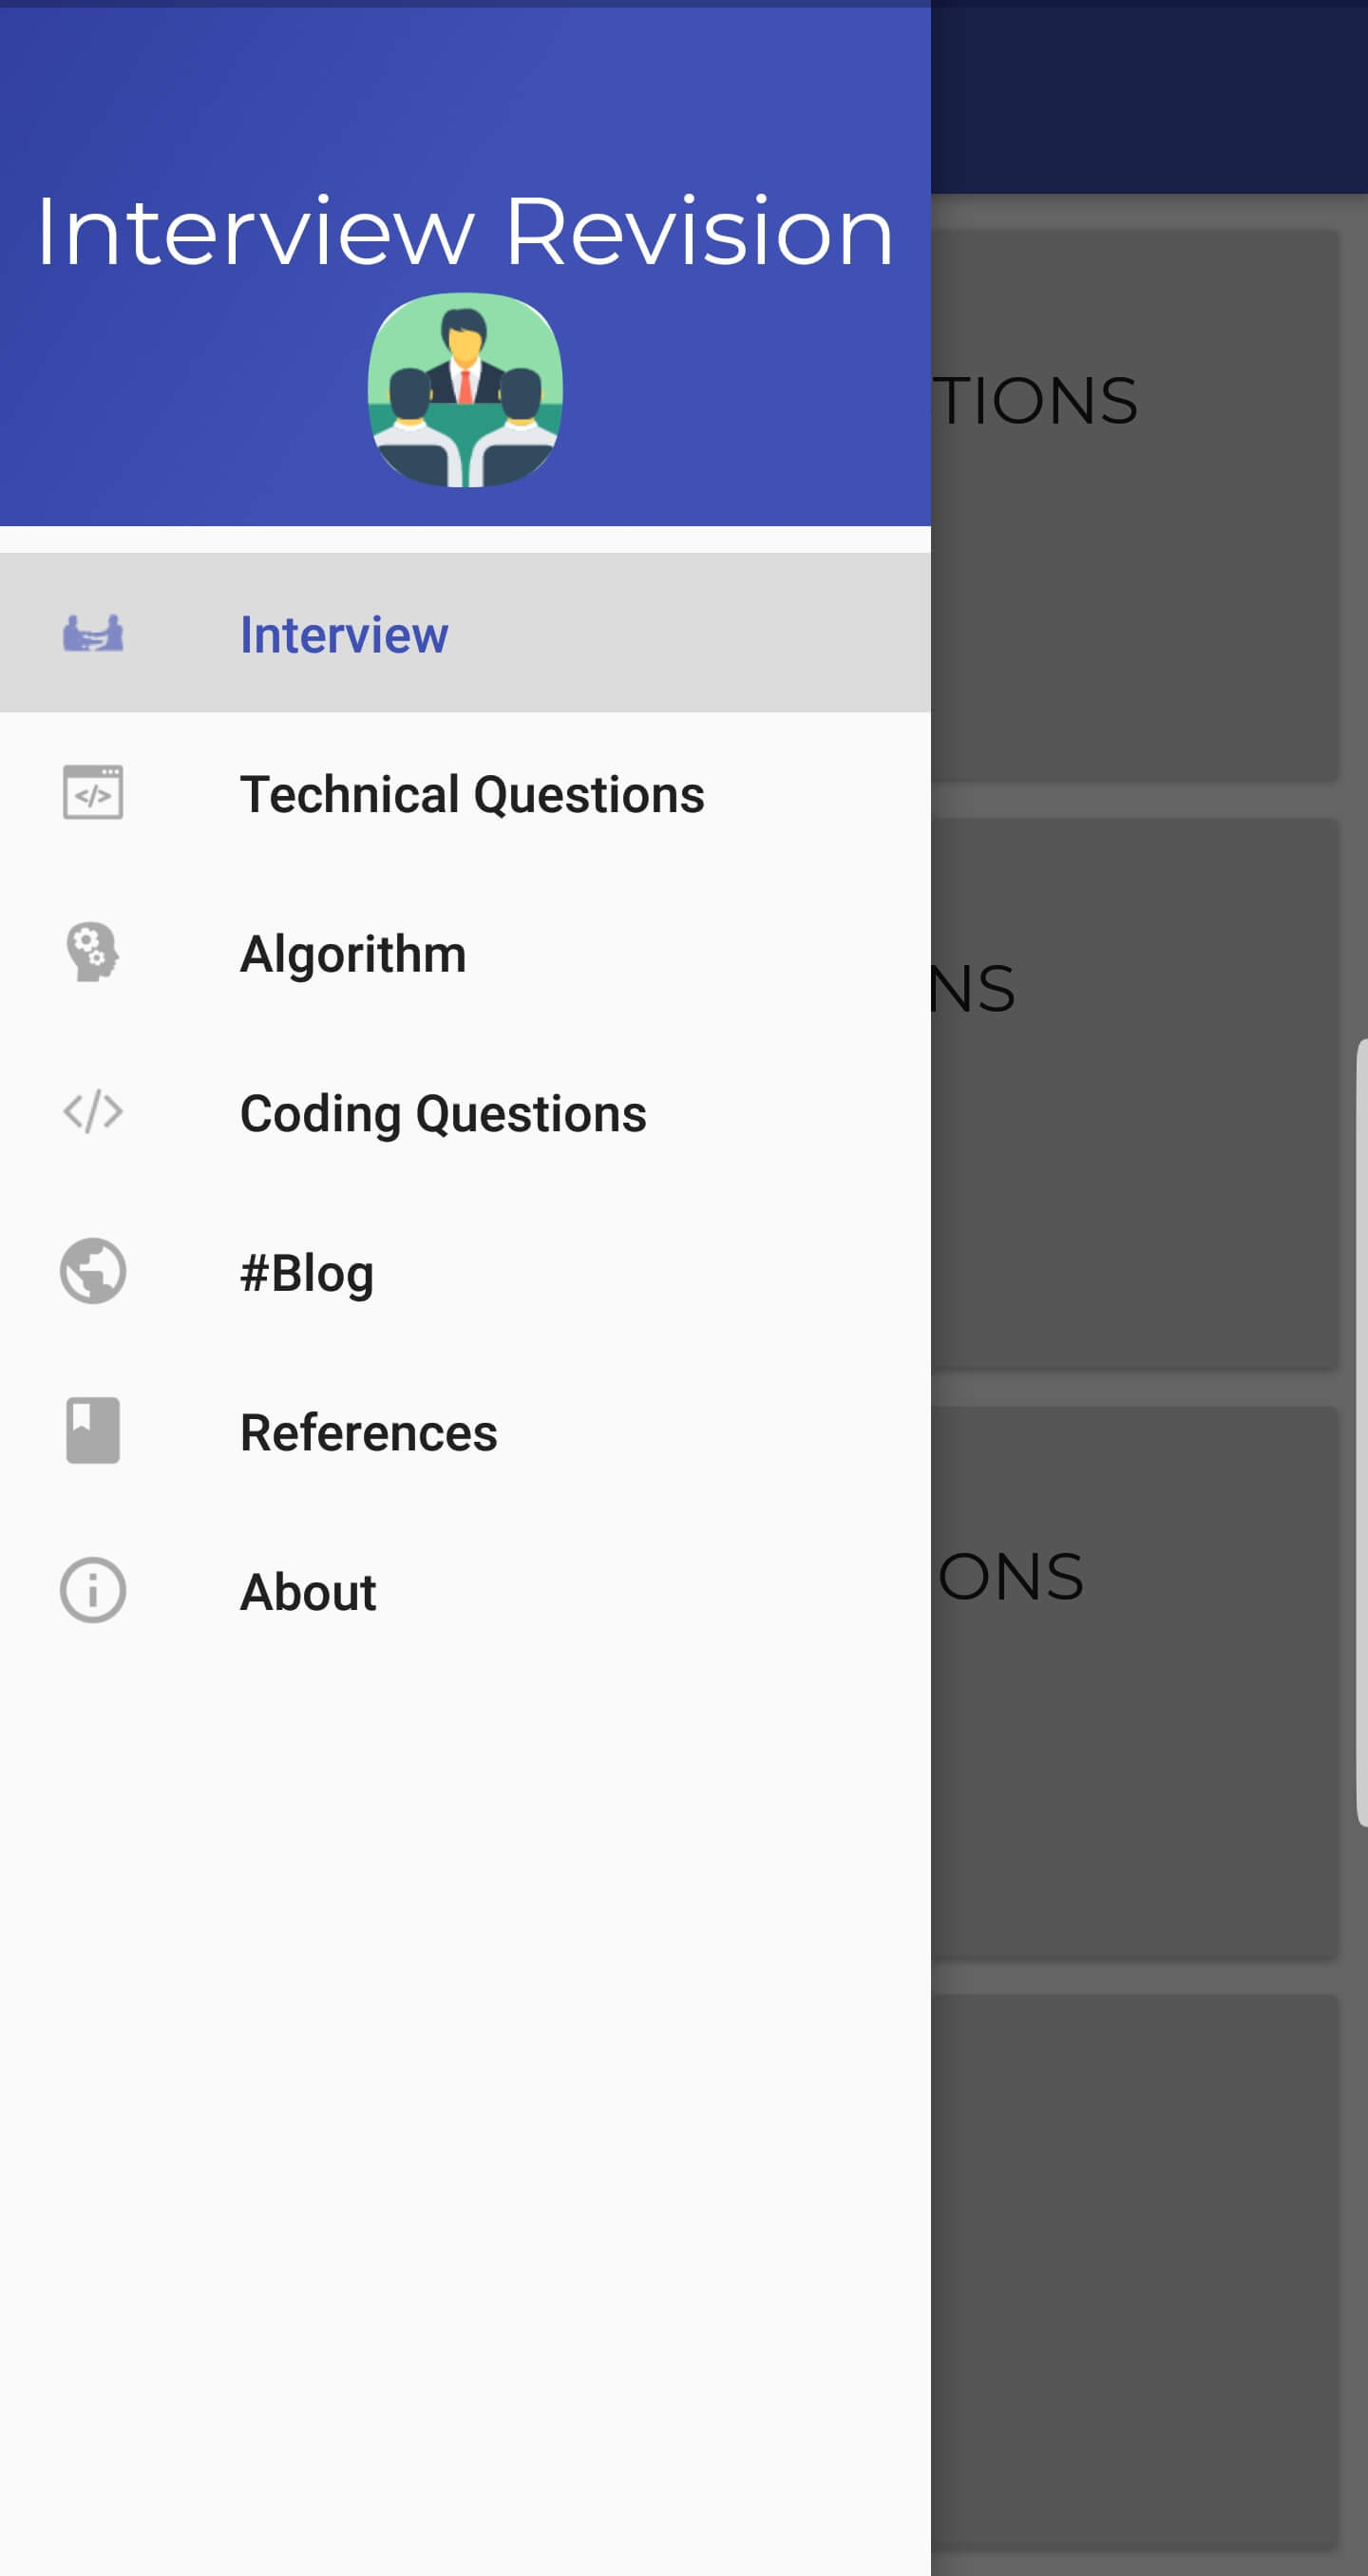 Interview Revision Main Screen